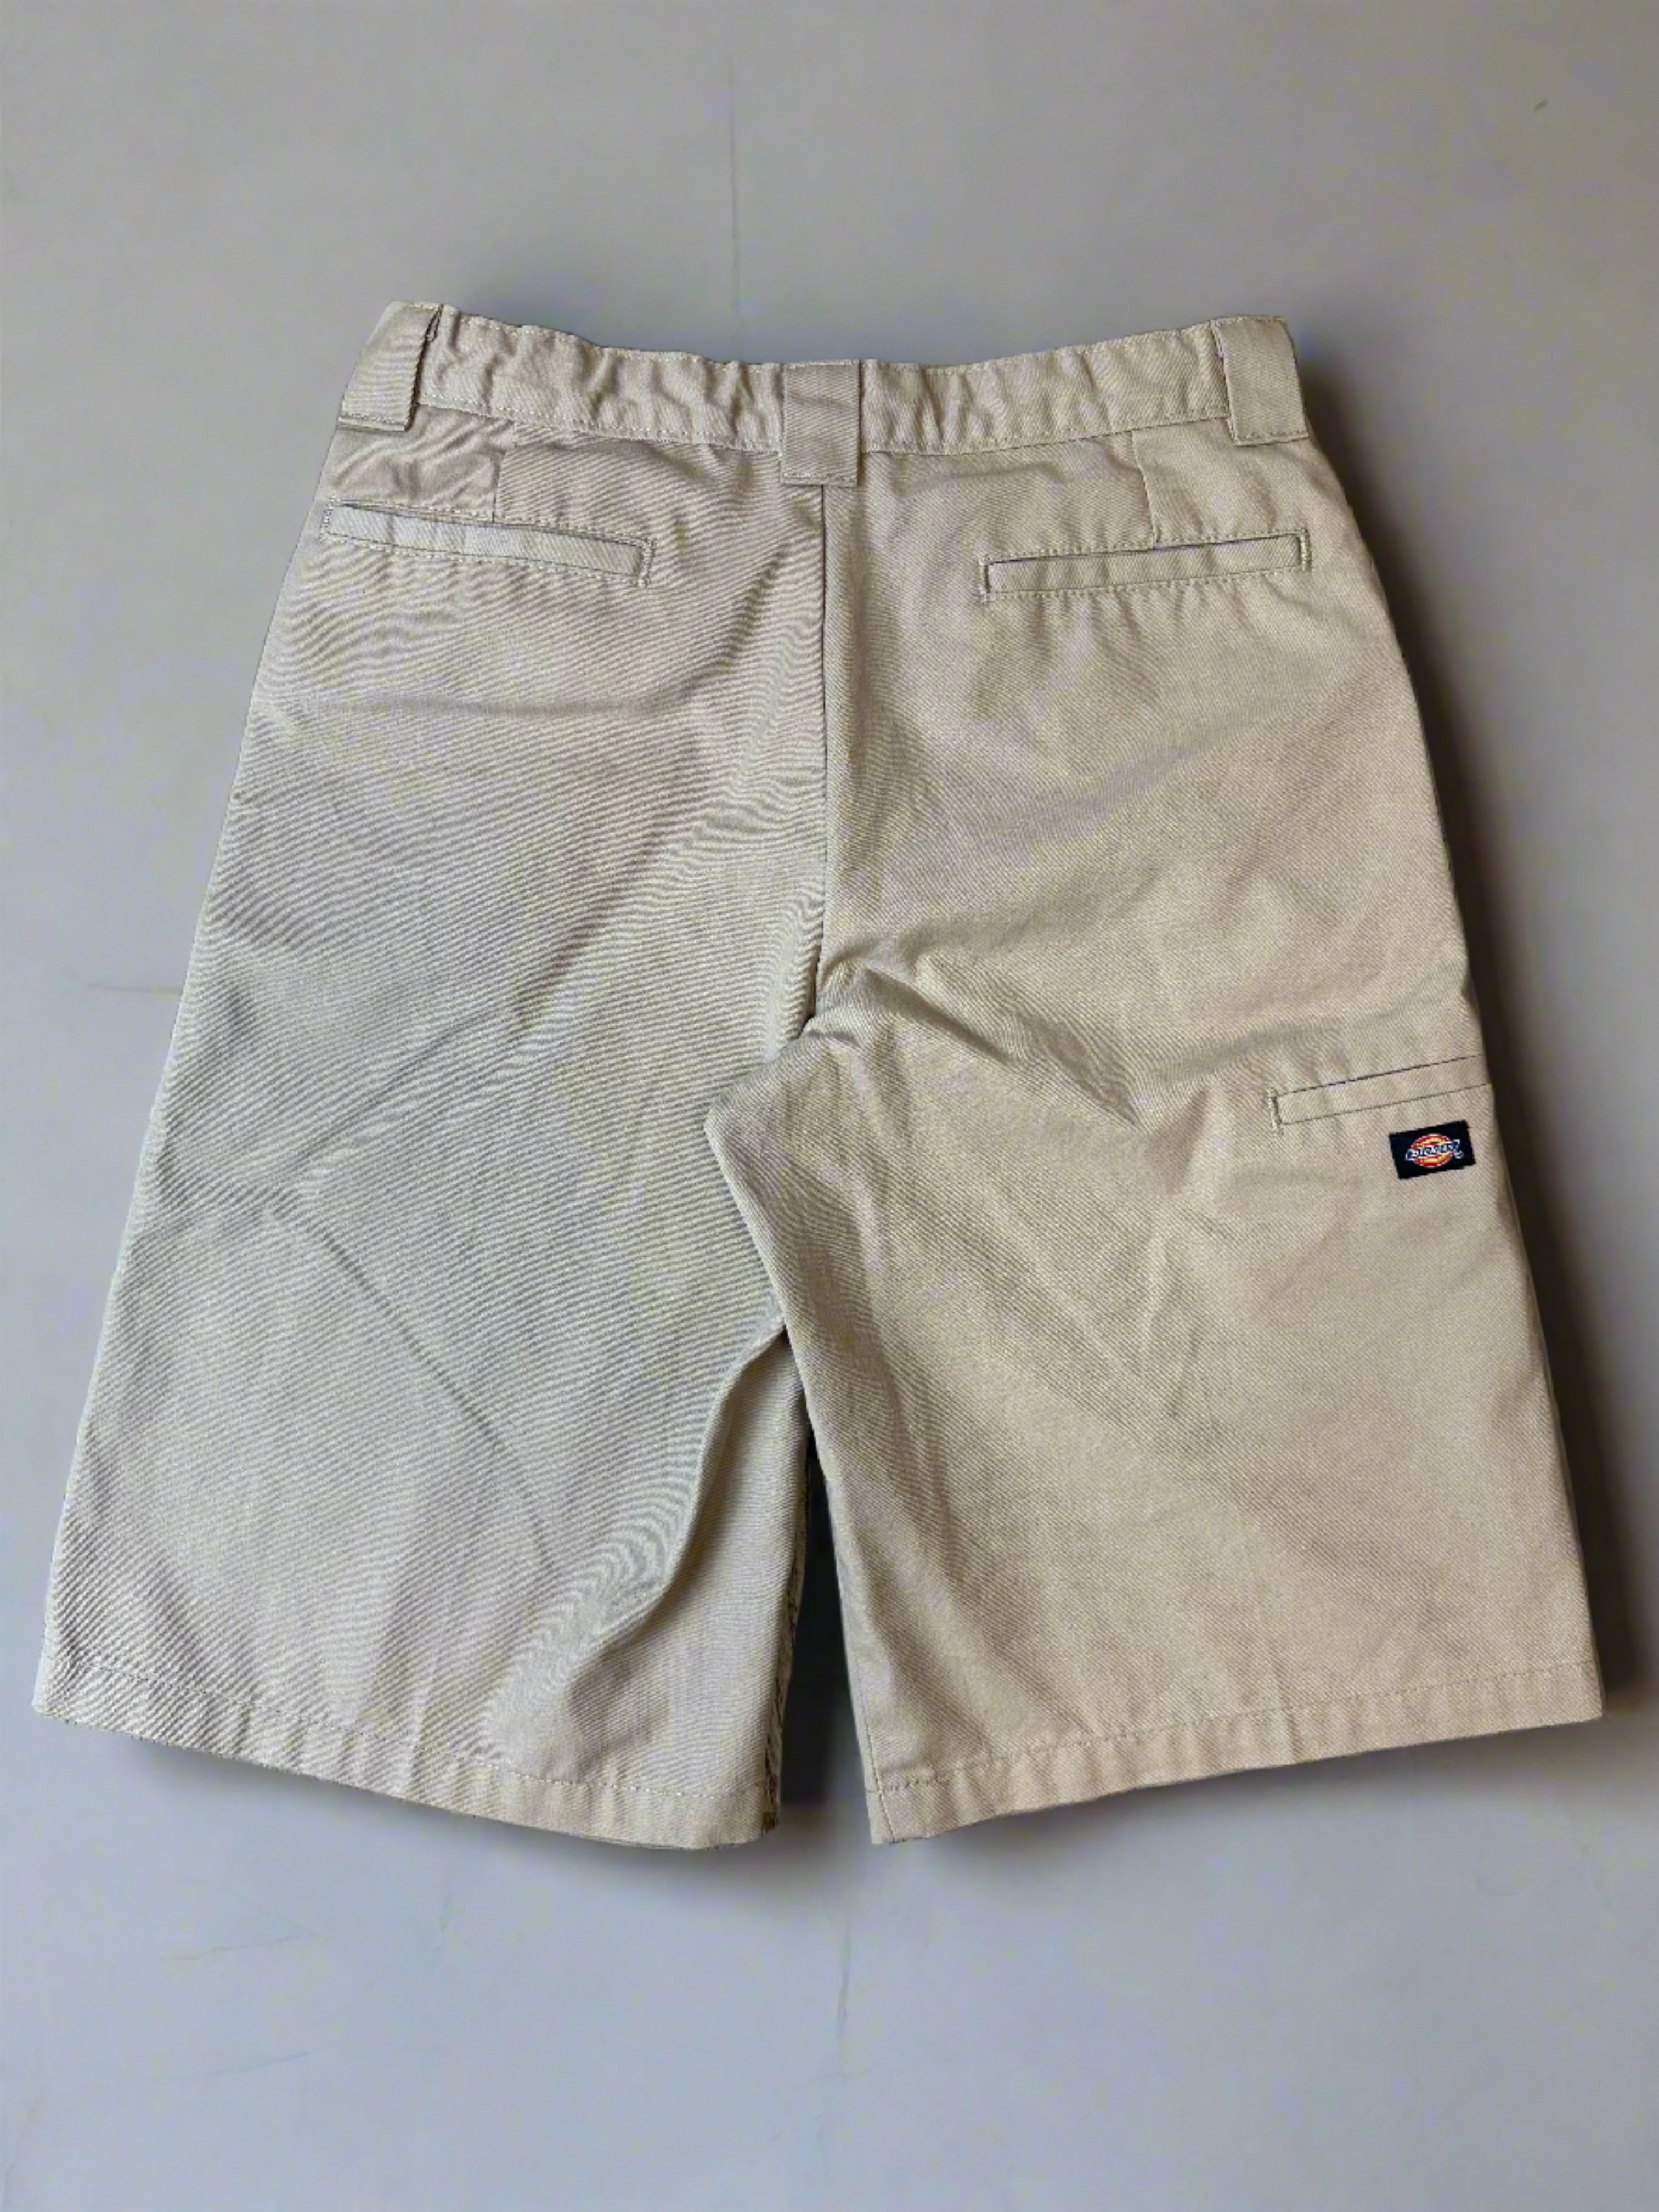 Vintage Dickies Cotton Shorts - size 30